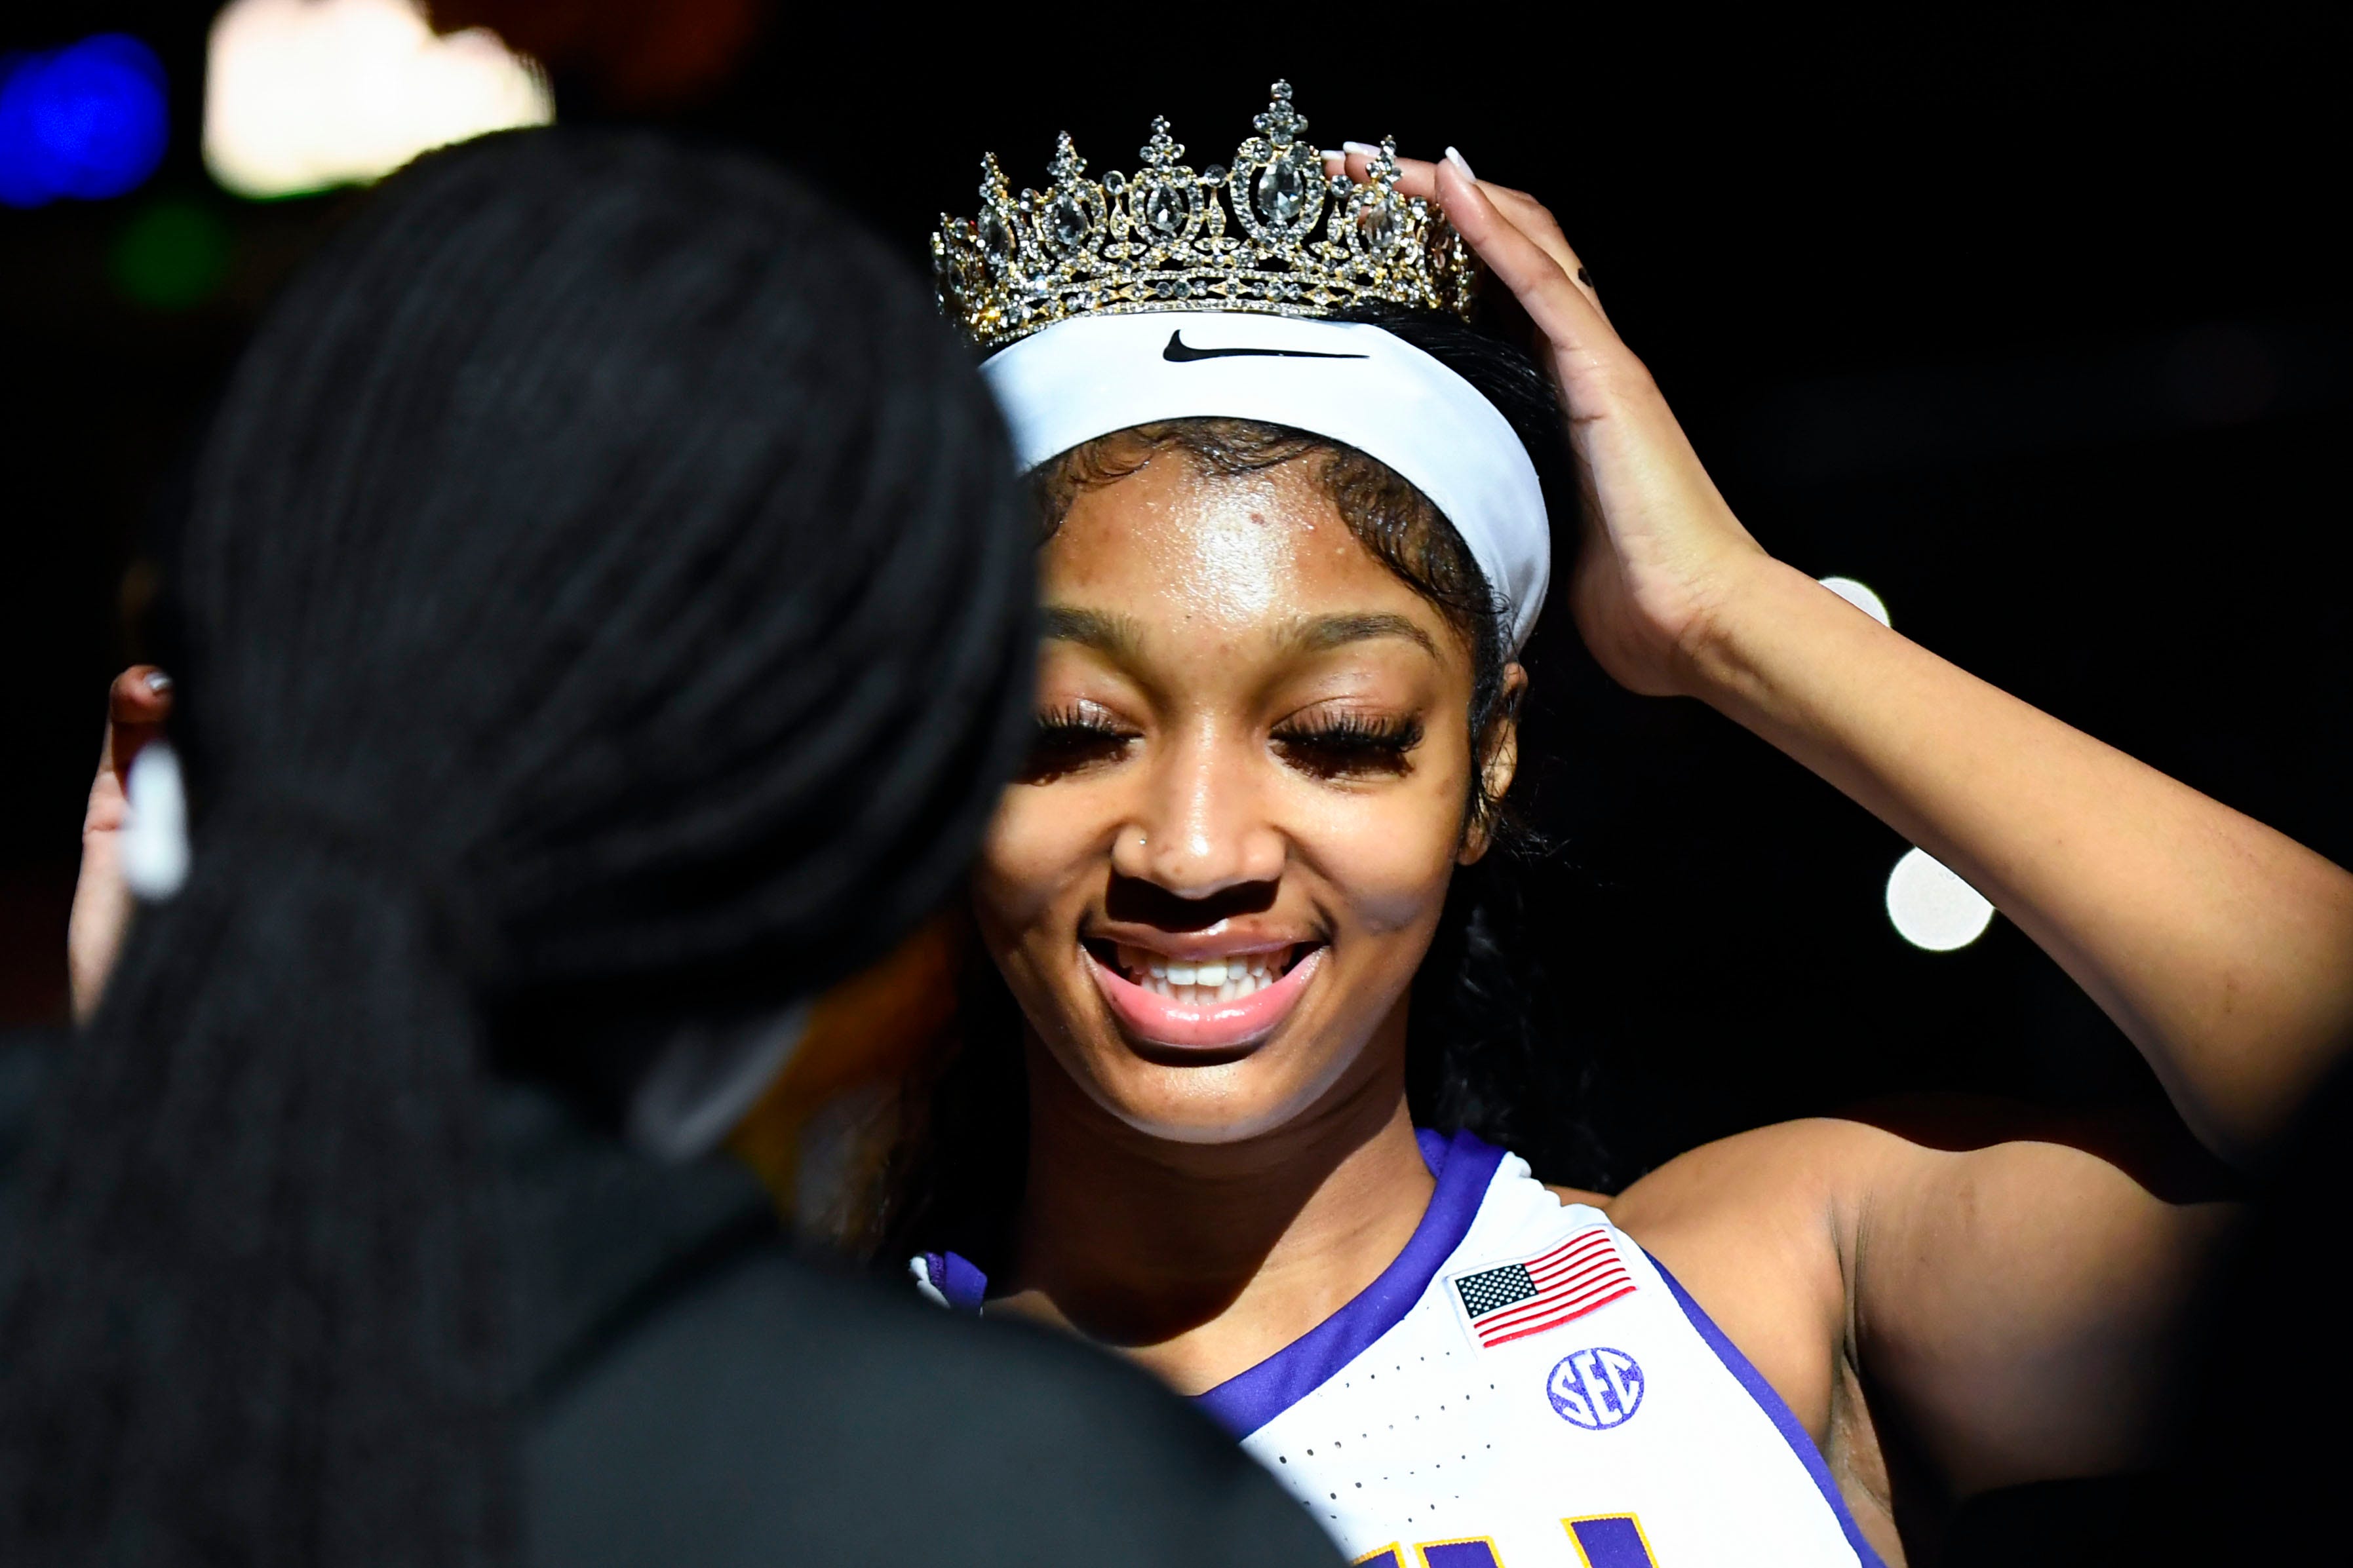 Louisiana State University forward Angel Reese (10) or the "Bayou Barbie" puts on her crown while being introduced before the NCAA Women's Greenville Regional Elite Eight Basketball Tournament against Miami at Bon Secours Wellness Arena in Greenville, S.C. Sunday, March 26, 2023.